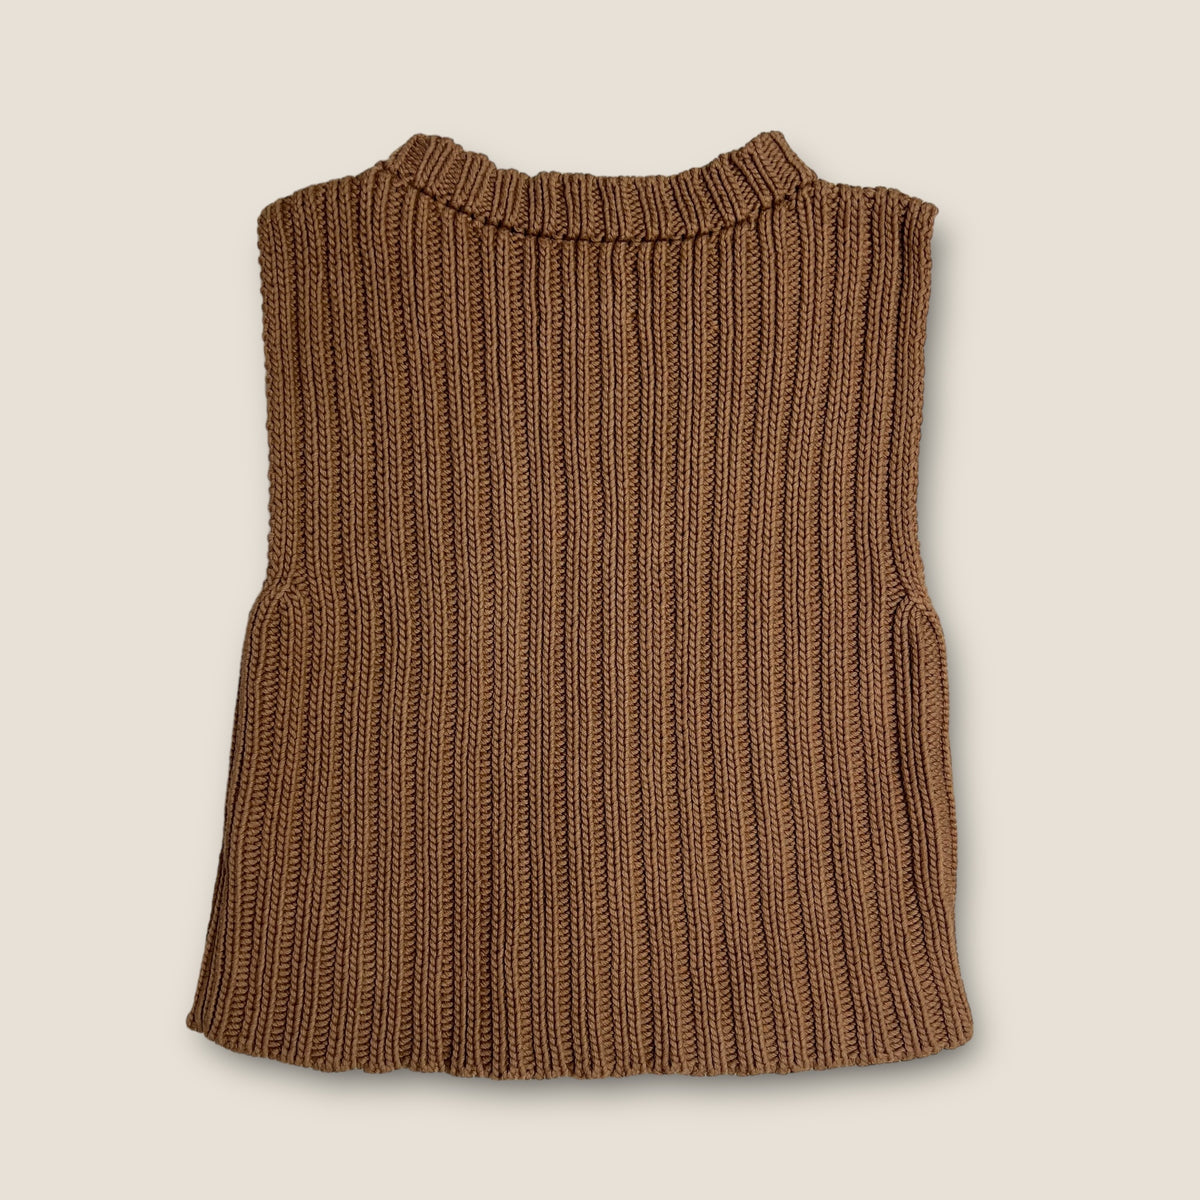 Jaggery Knit Vest Top size 2-4 years